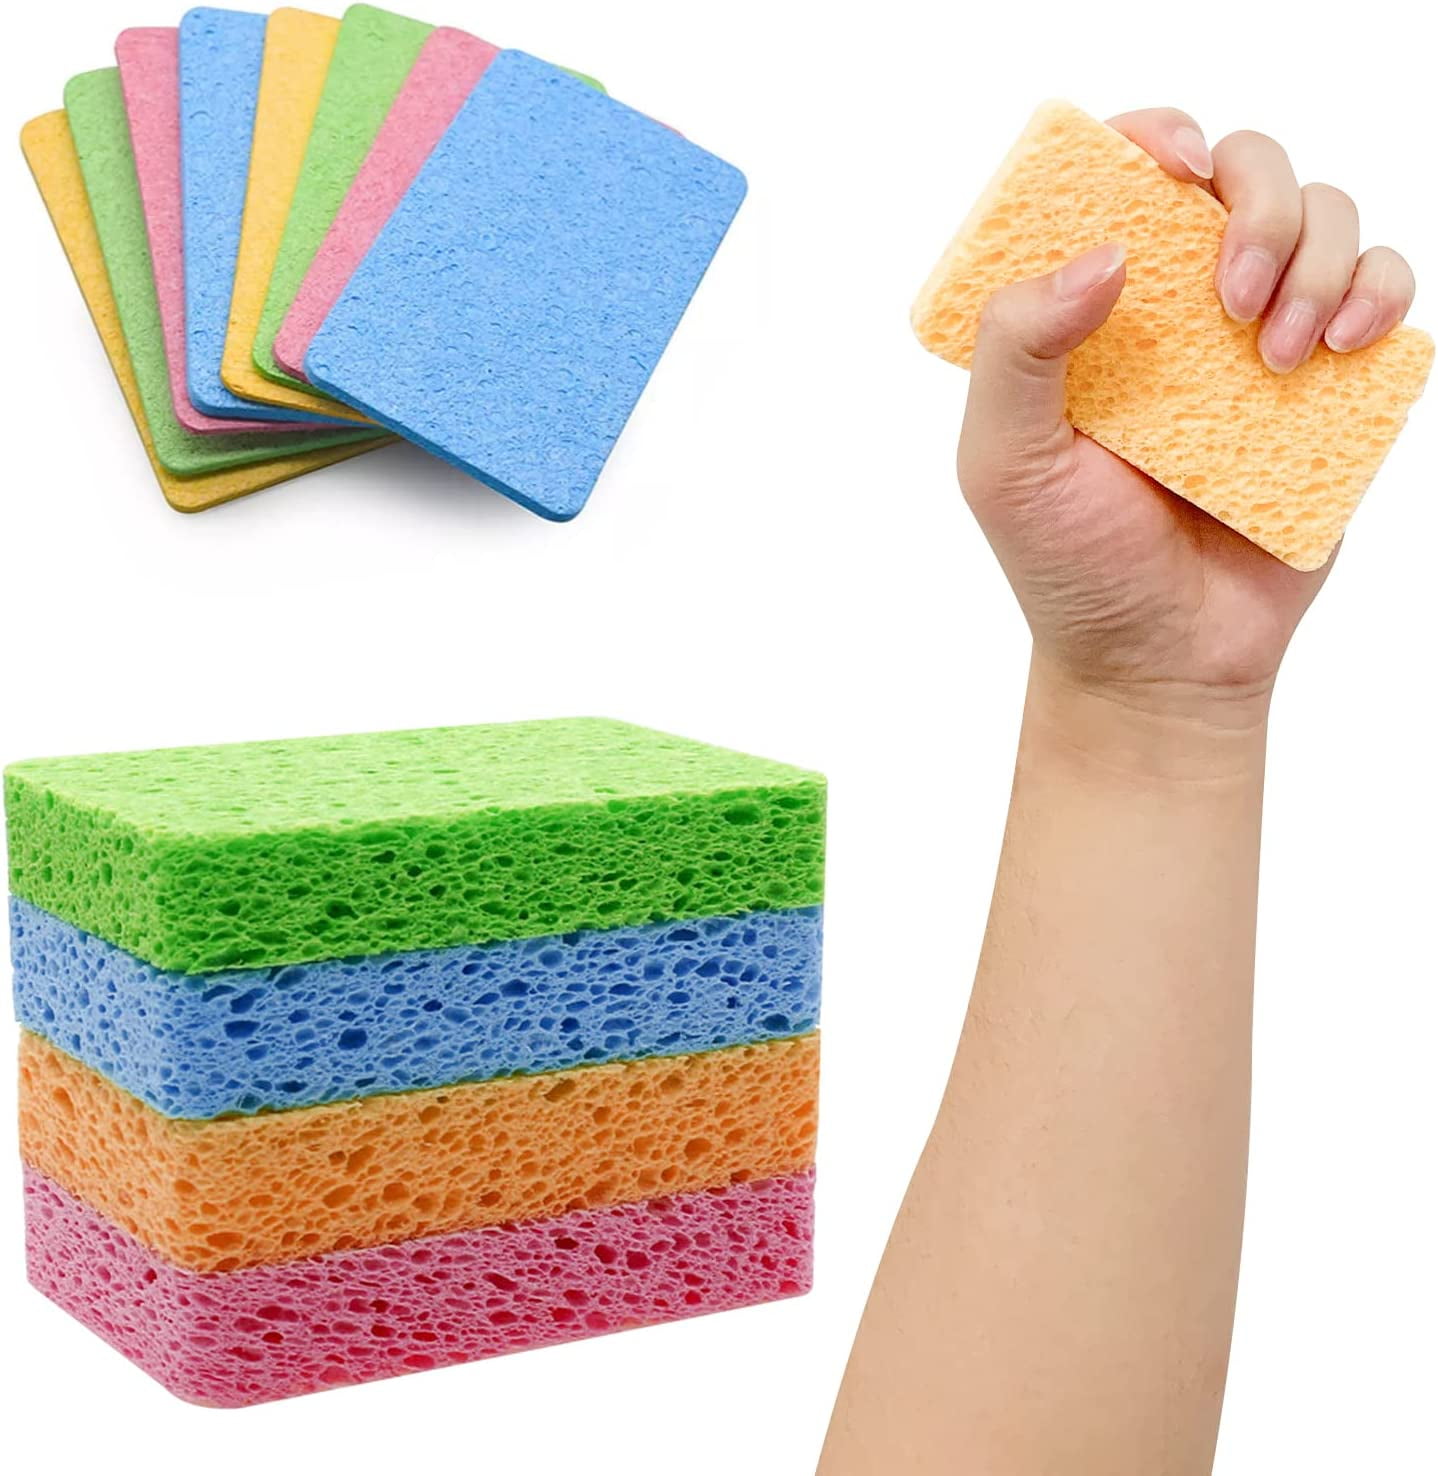 How to Clean and Disinfect Kitchen Sponges